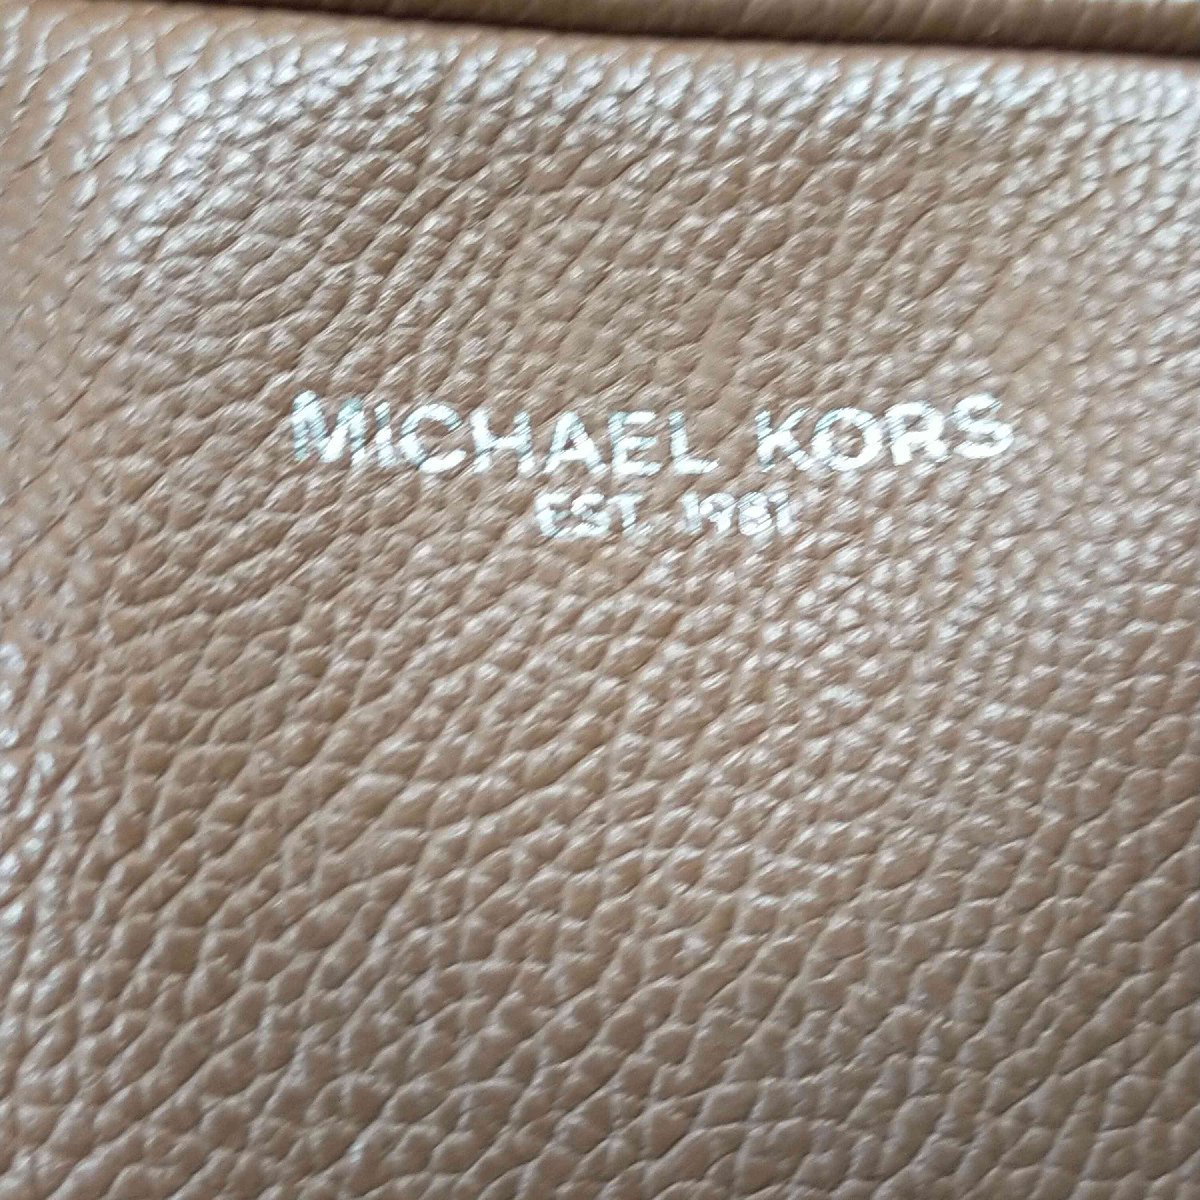 Michael Kors( Michael Kors ) leather briefcase business shoulder bag lady's used old clothes 0407